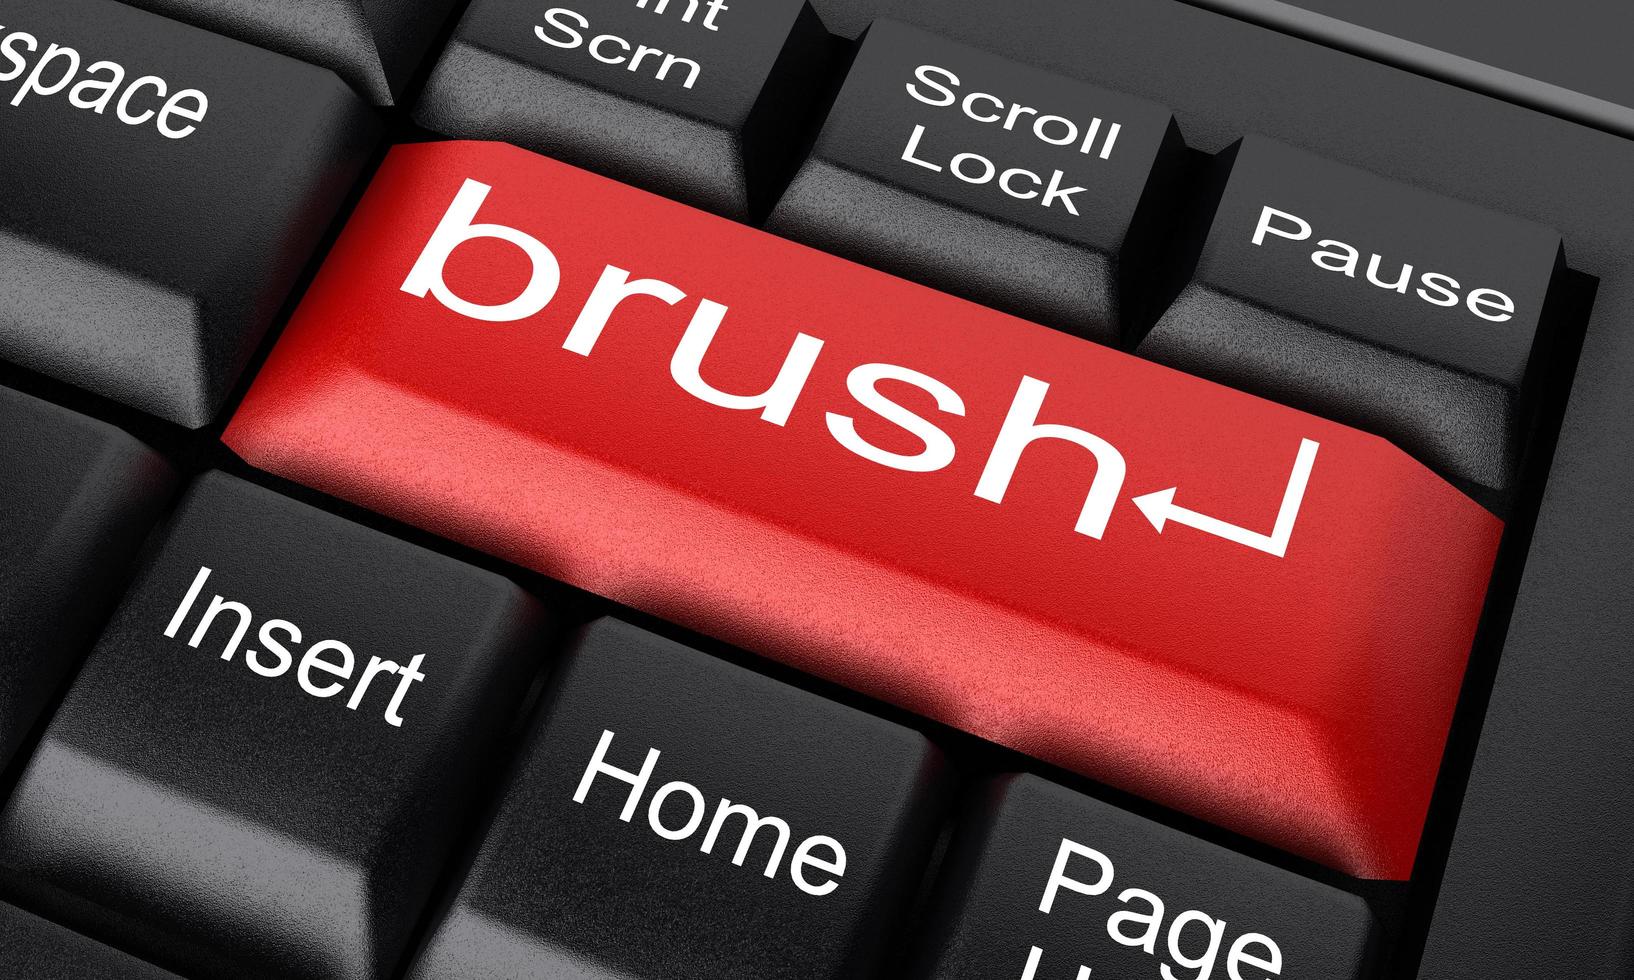 brush word on red keyboard button photo